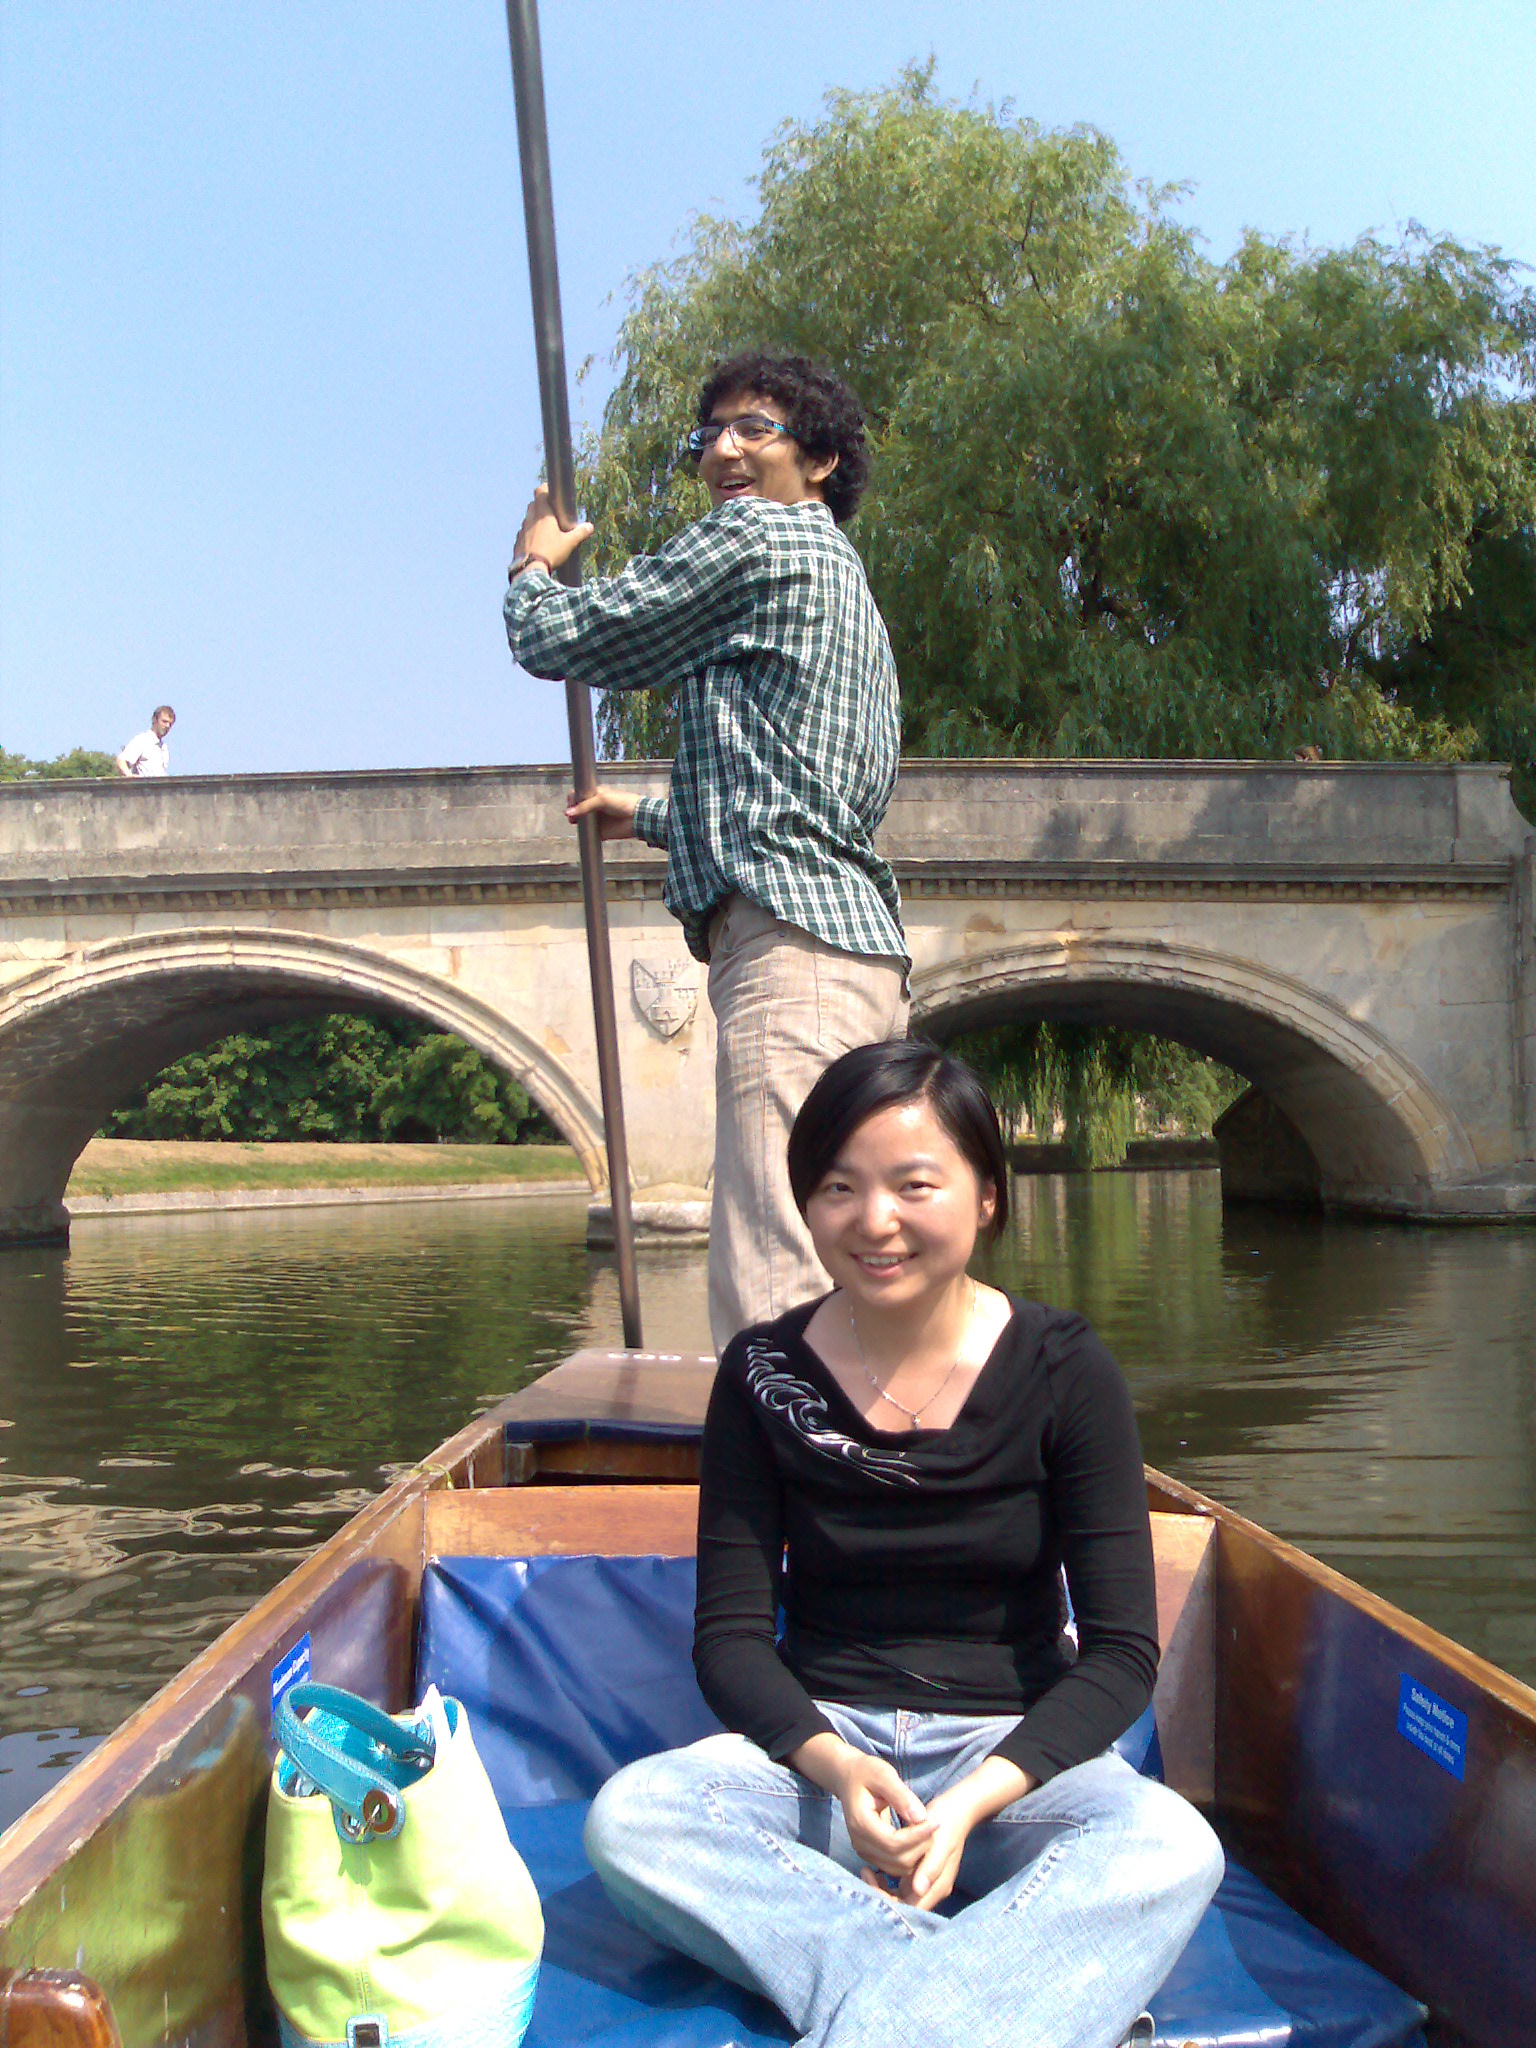 Nick and Xueni from the Cambridge team